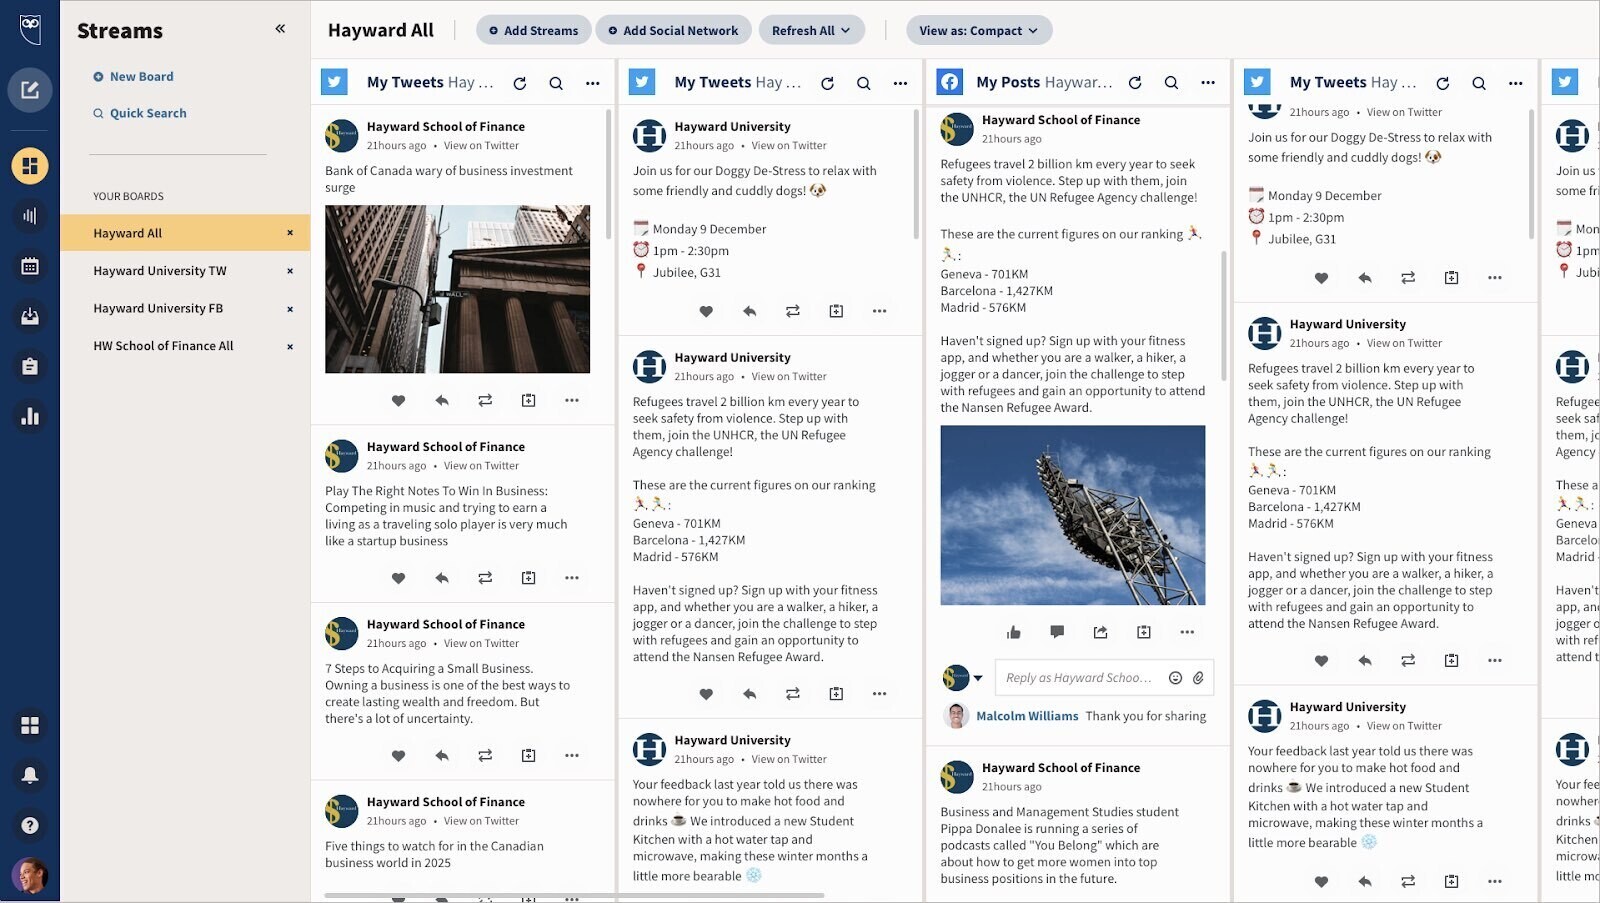 Hootsuite lets you manage social posts across multiple Twitter and Facebook accounts by sorting them into streams